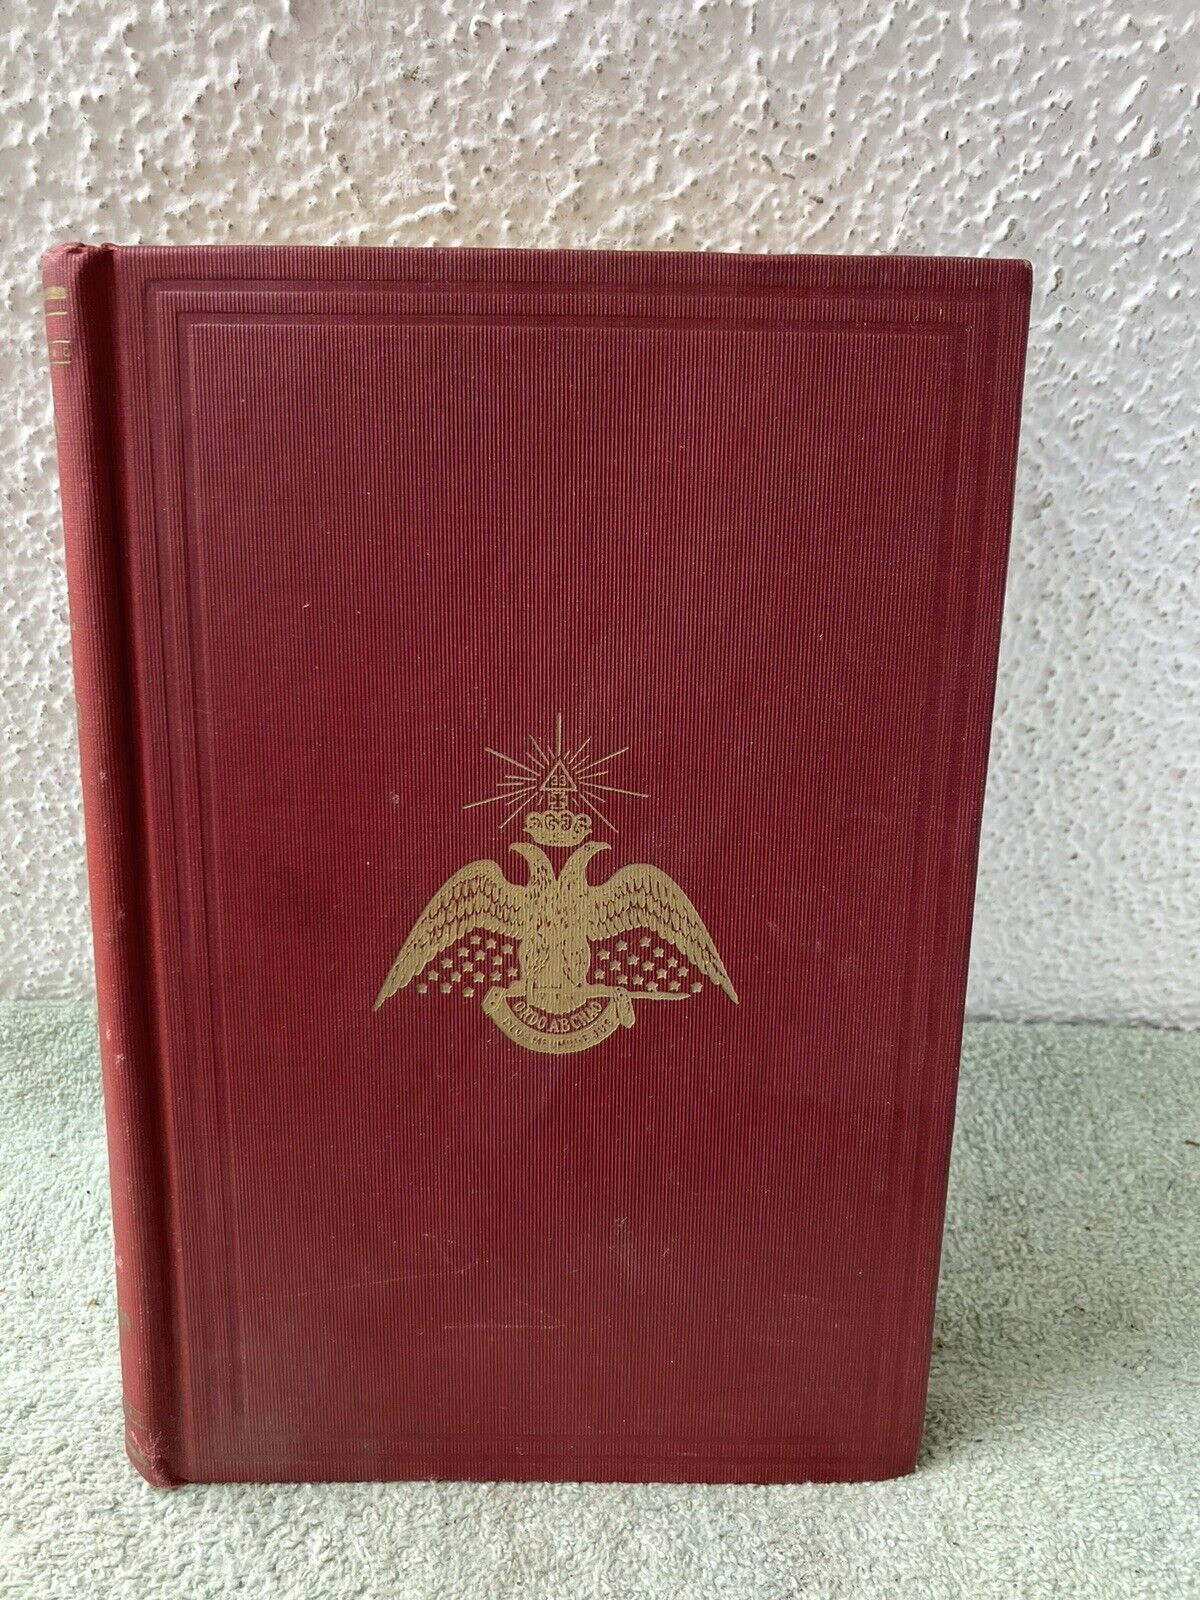 Morals And Dogma Ancient & Accepted Scottish Rite Freemasonry 1947 Book